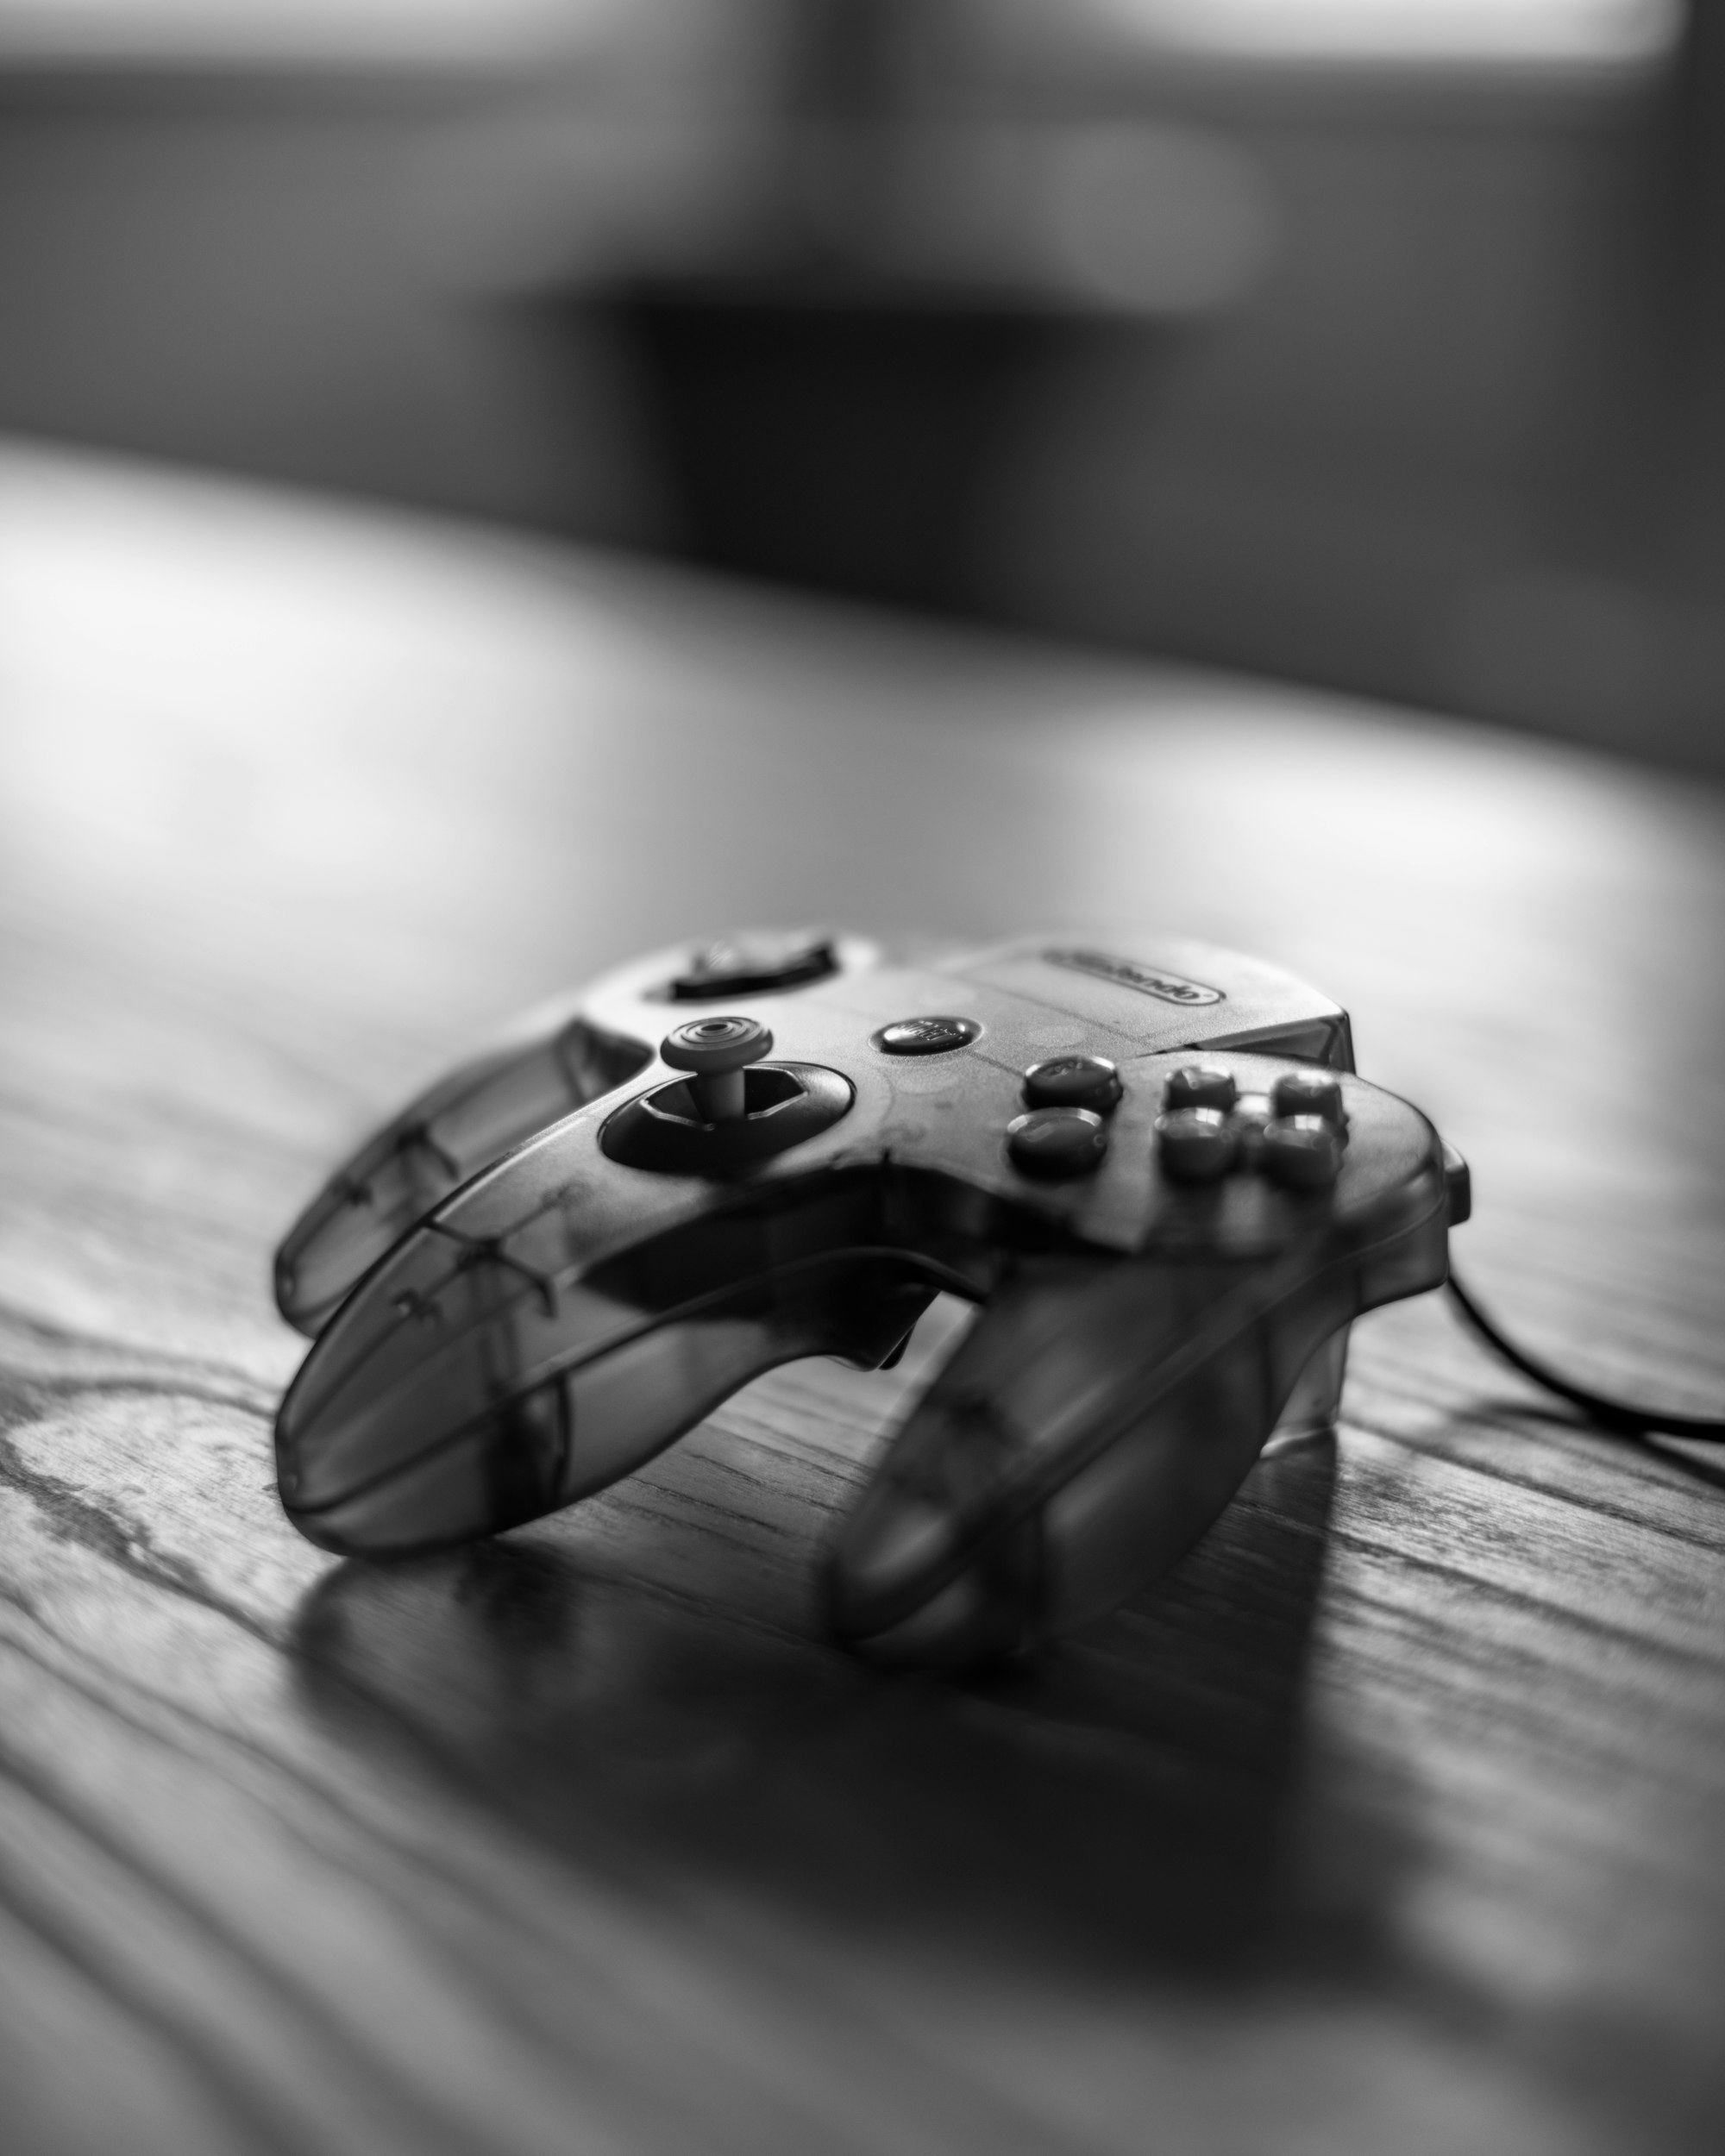 A closeup of a three-pronged, see-through Nintendo 64 controller, in black-and-white.